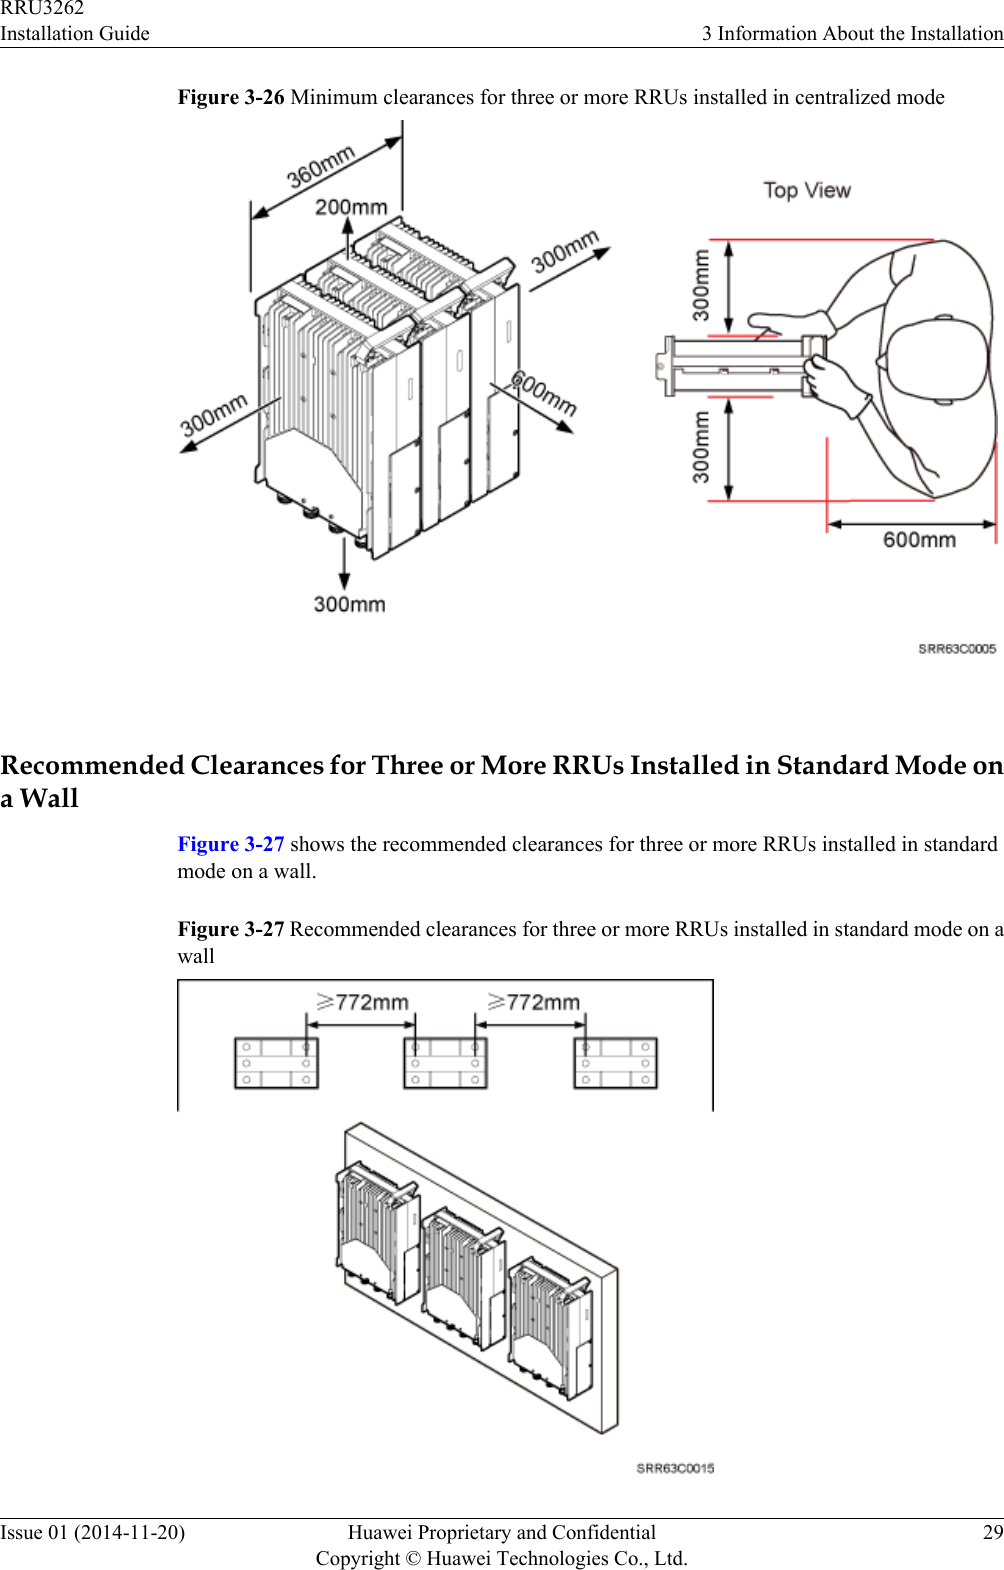 Figure 3-26 Minimum clearances for three or more RRUs installed in centralized mode Recommended Clearances for Three or More RRUs Installed in Standard Mode ona WallFigure 3-27 shows the recommended clearances for three or more RRUs installed in standardmode on a wall.Figure 3-27 Recommended clearances for three or more RRUs installed in standard mode on awallRRU3262Installation Guide 3 Information About the InstallationIssue 01 (2014-11-20) Huawei Proprietary and ConfidentialCopyright © Huawei Technologies Co., Ltd.29